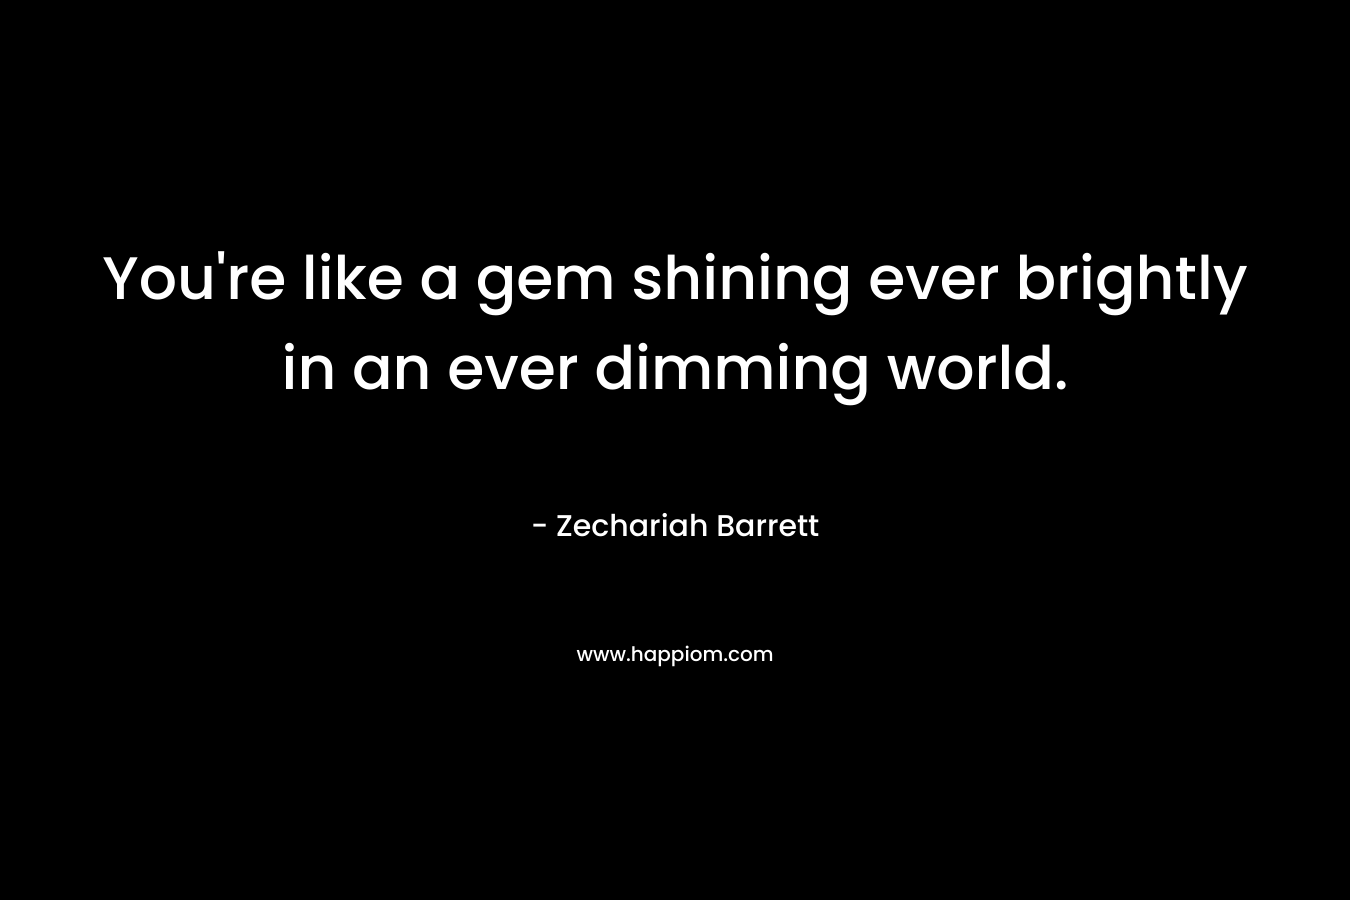 You’re like a gem shining ever brightly in an ever dimming world. – Zechariah Barrett